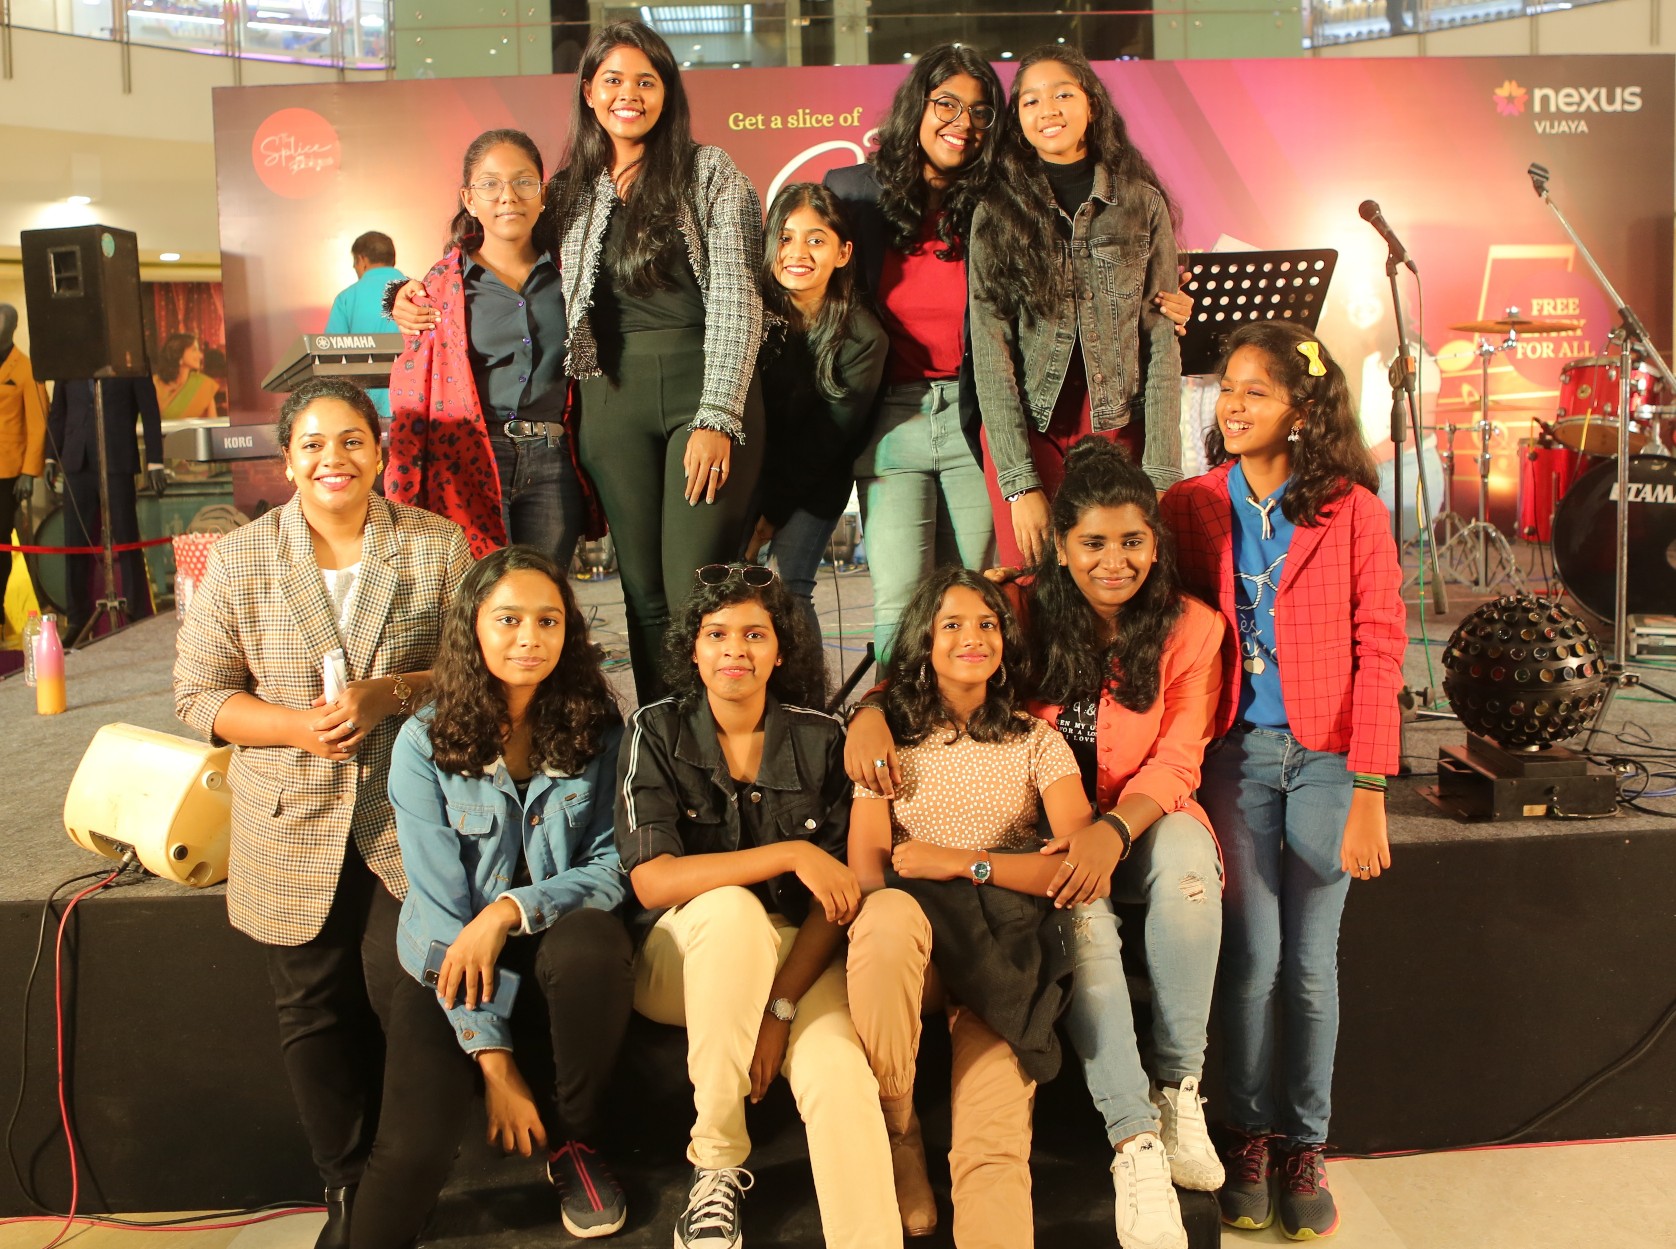 An all-girls music band is set to spice up the stage at Nexus Vijaya Mall